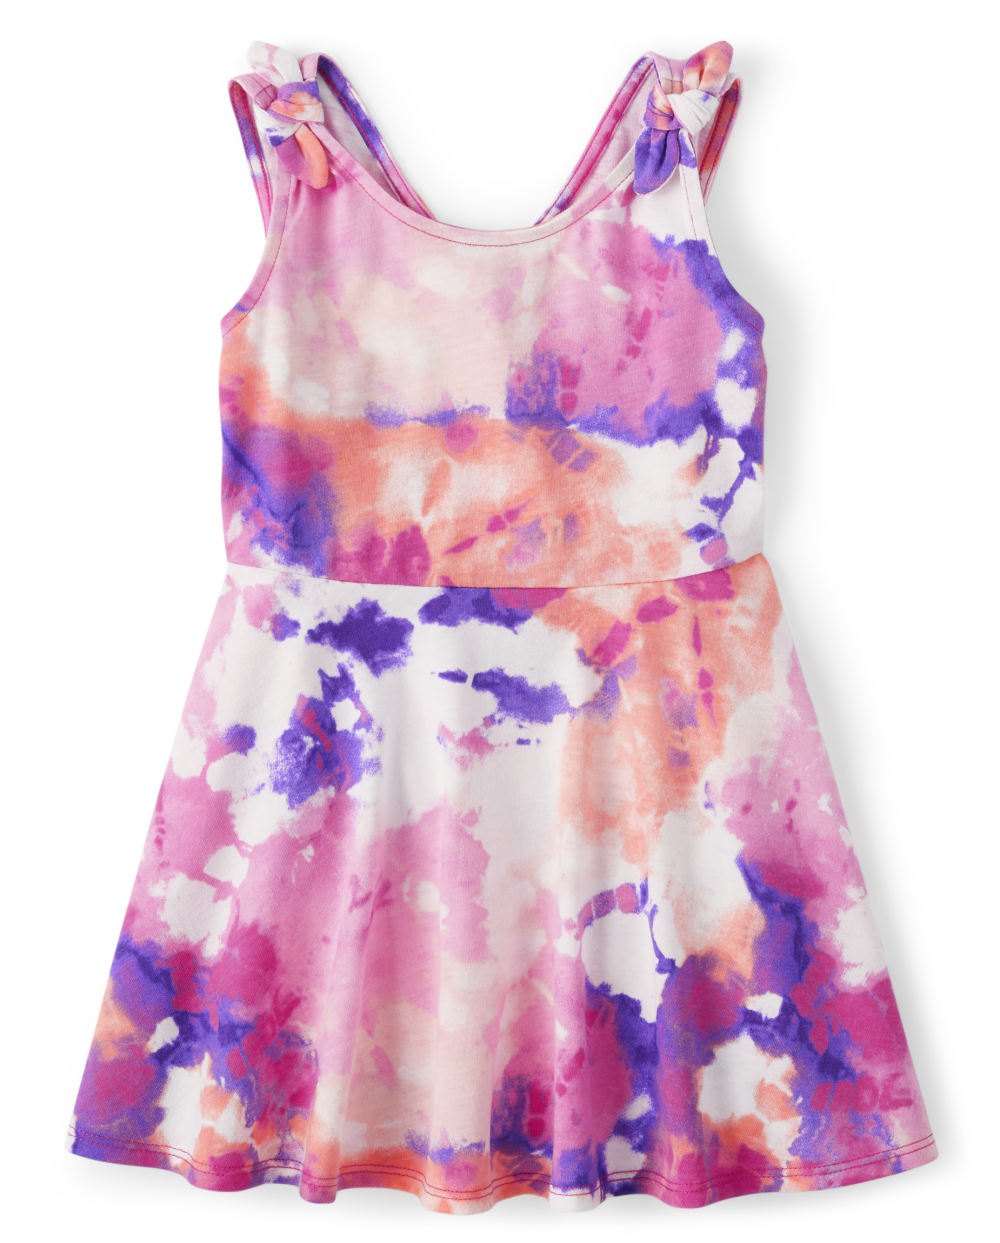 Toddler Baby Sleeveless Above the Knee V Back Tie Dye Print Dress With a Bow(s)